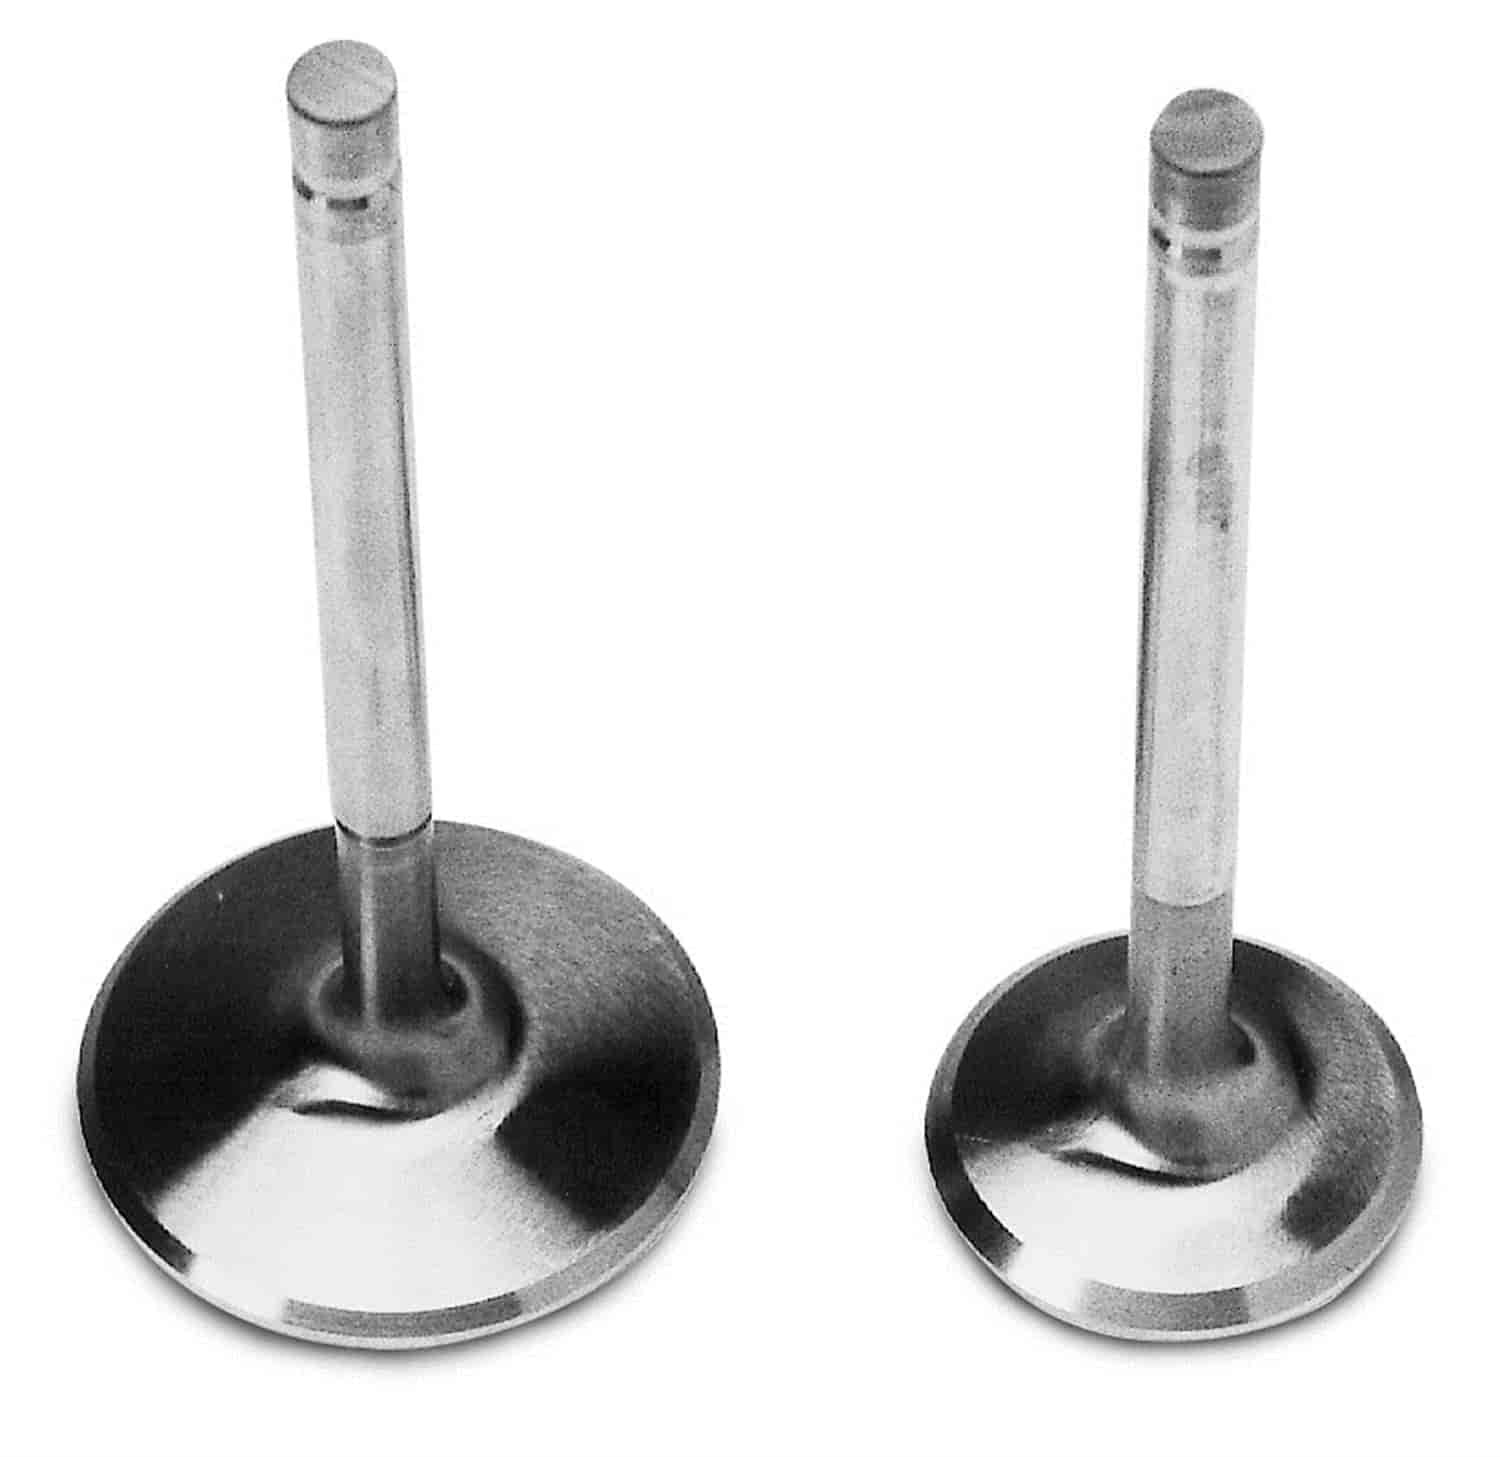 Exhaust Valve Set 1.55" for Small Block Chevy E-Tec 170 Heads #350-60979